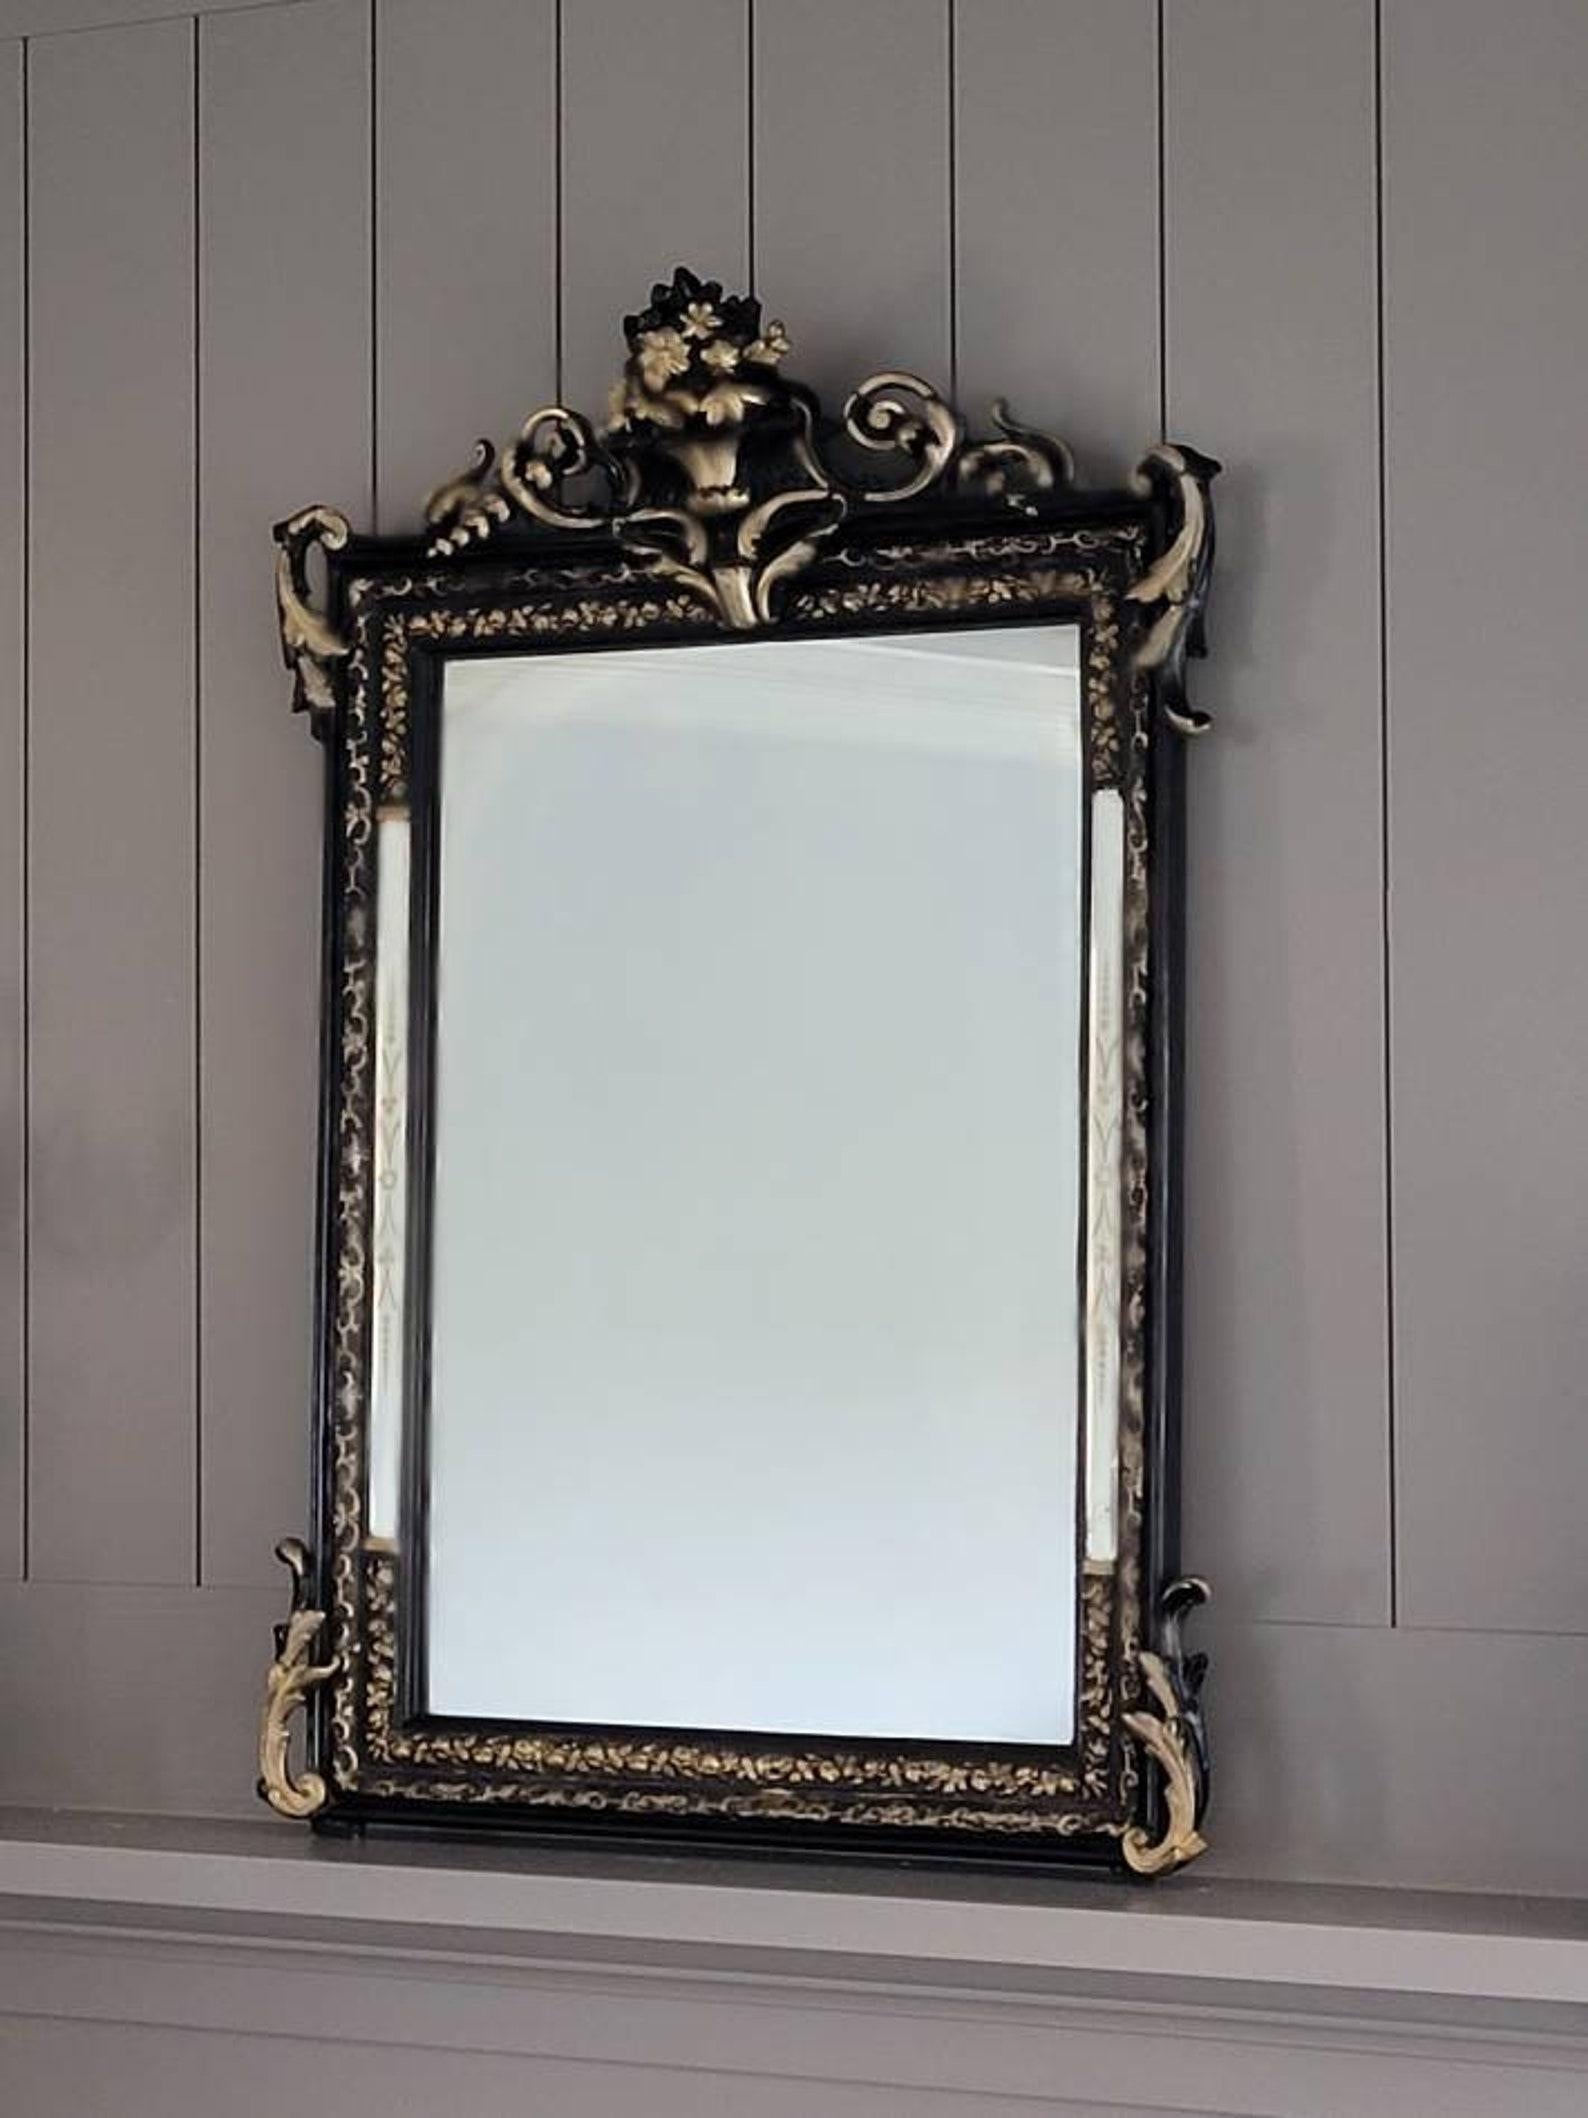 A stunning period Napoleon III (1852-1870) French hand carved, painted and gilded wall mirror by JB Paris. circa 1850s/early 1860s

Born in France in the mid-19th century, exquisitely hand-crafted high-quality Parisian work, using elements from